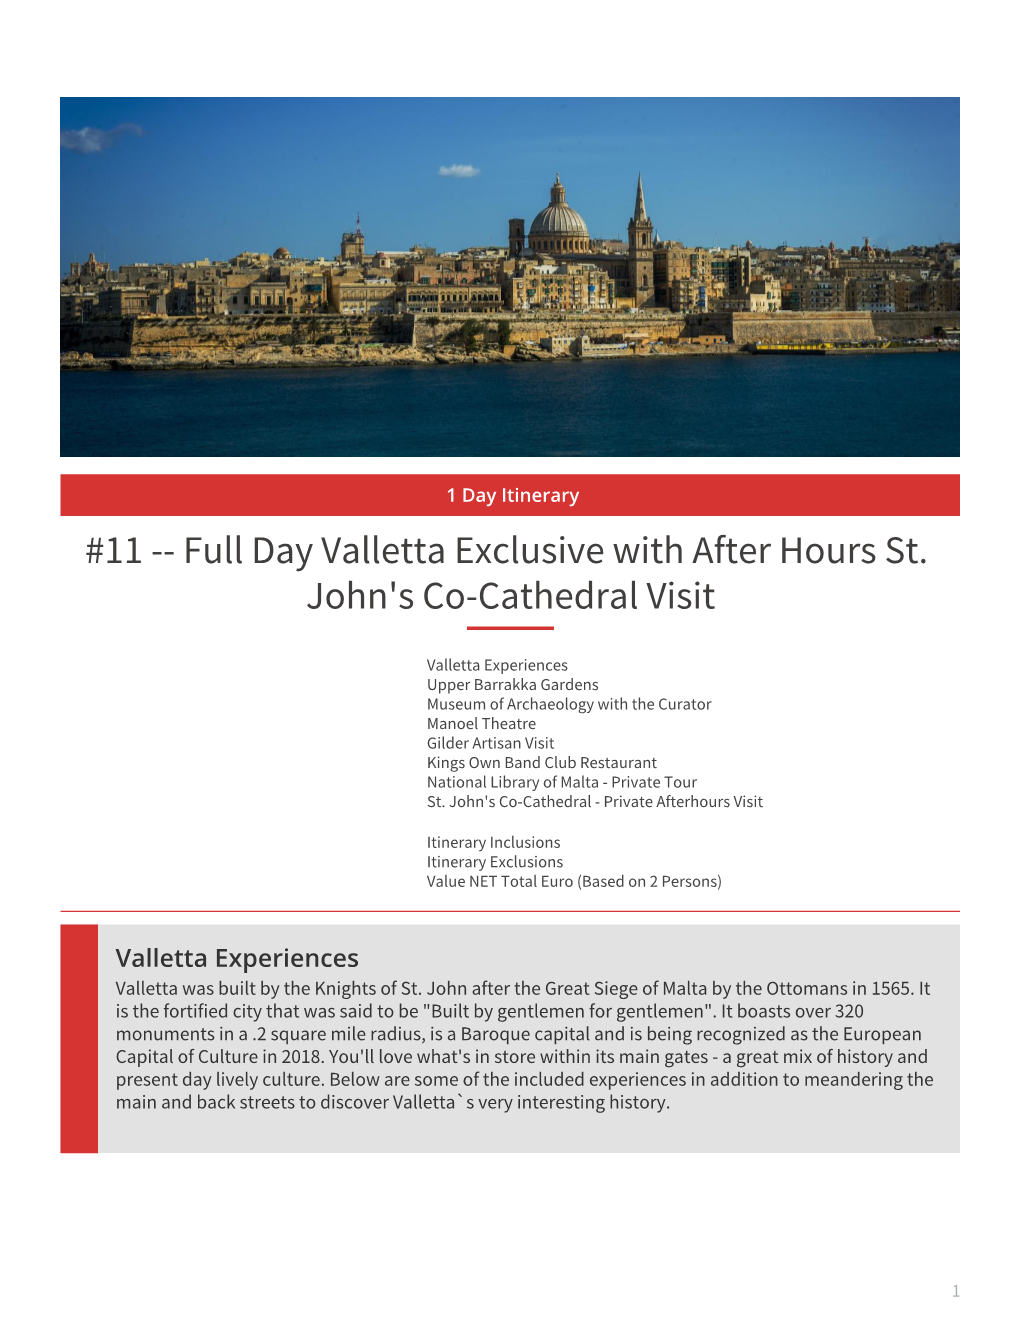 Full Day Valletta Exclusive with After Hours St. John's Co-Cathedral Visit